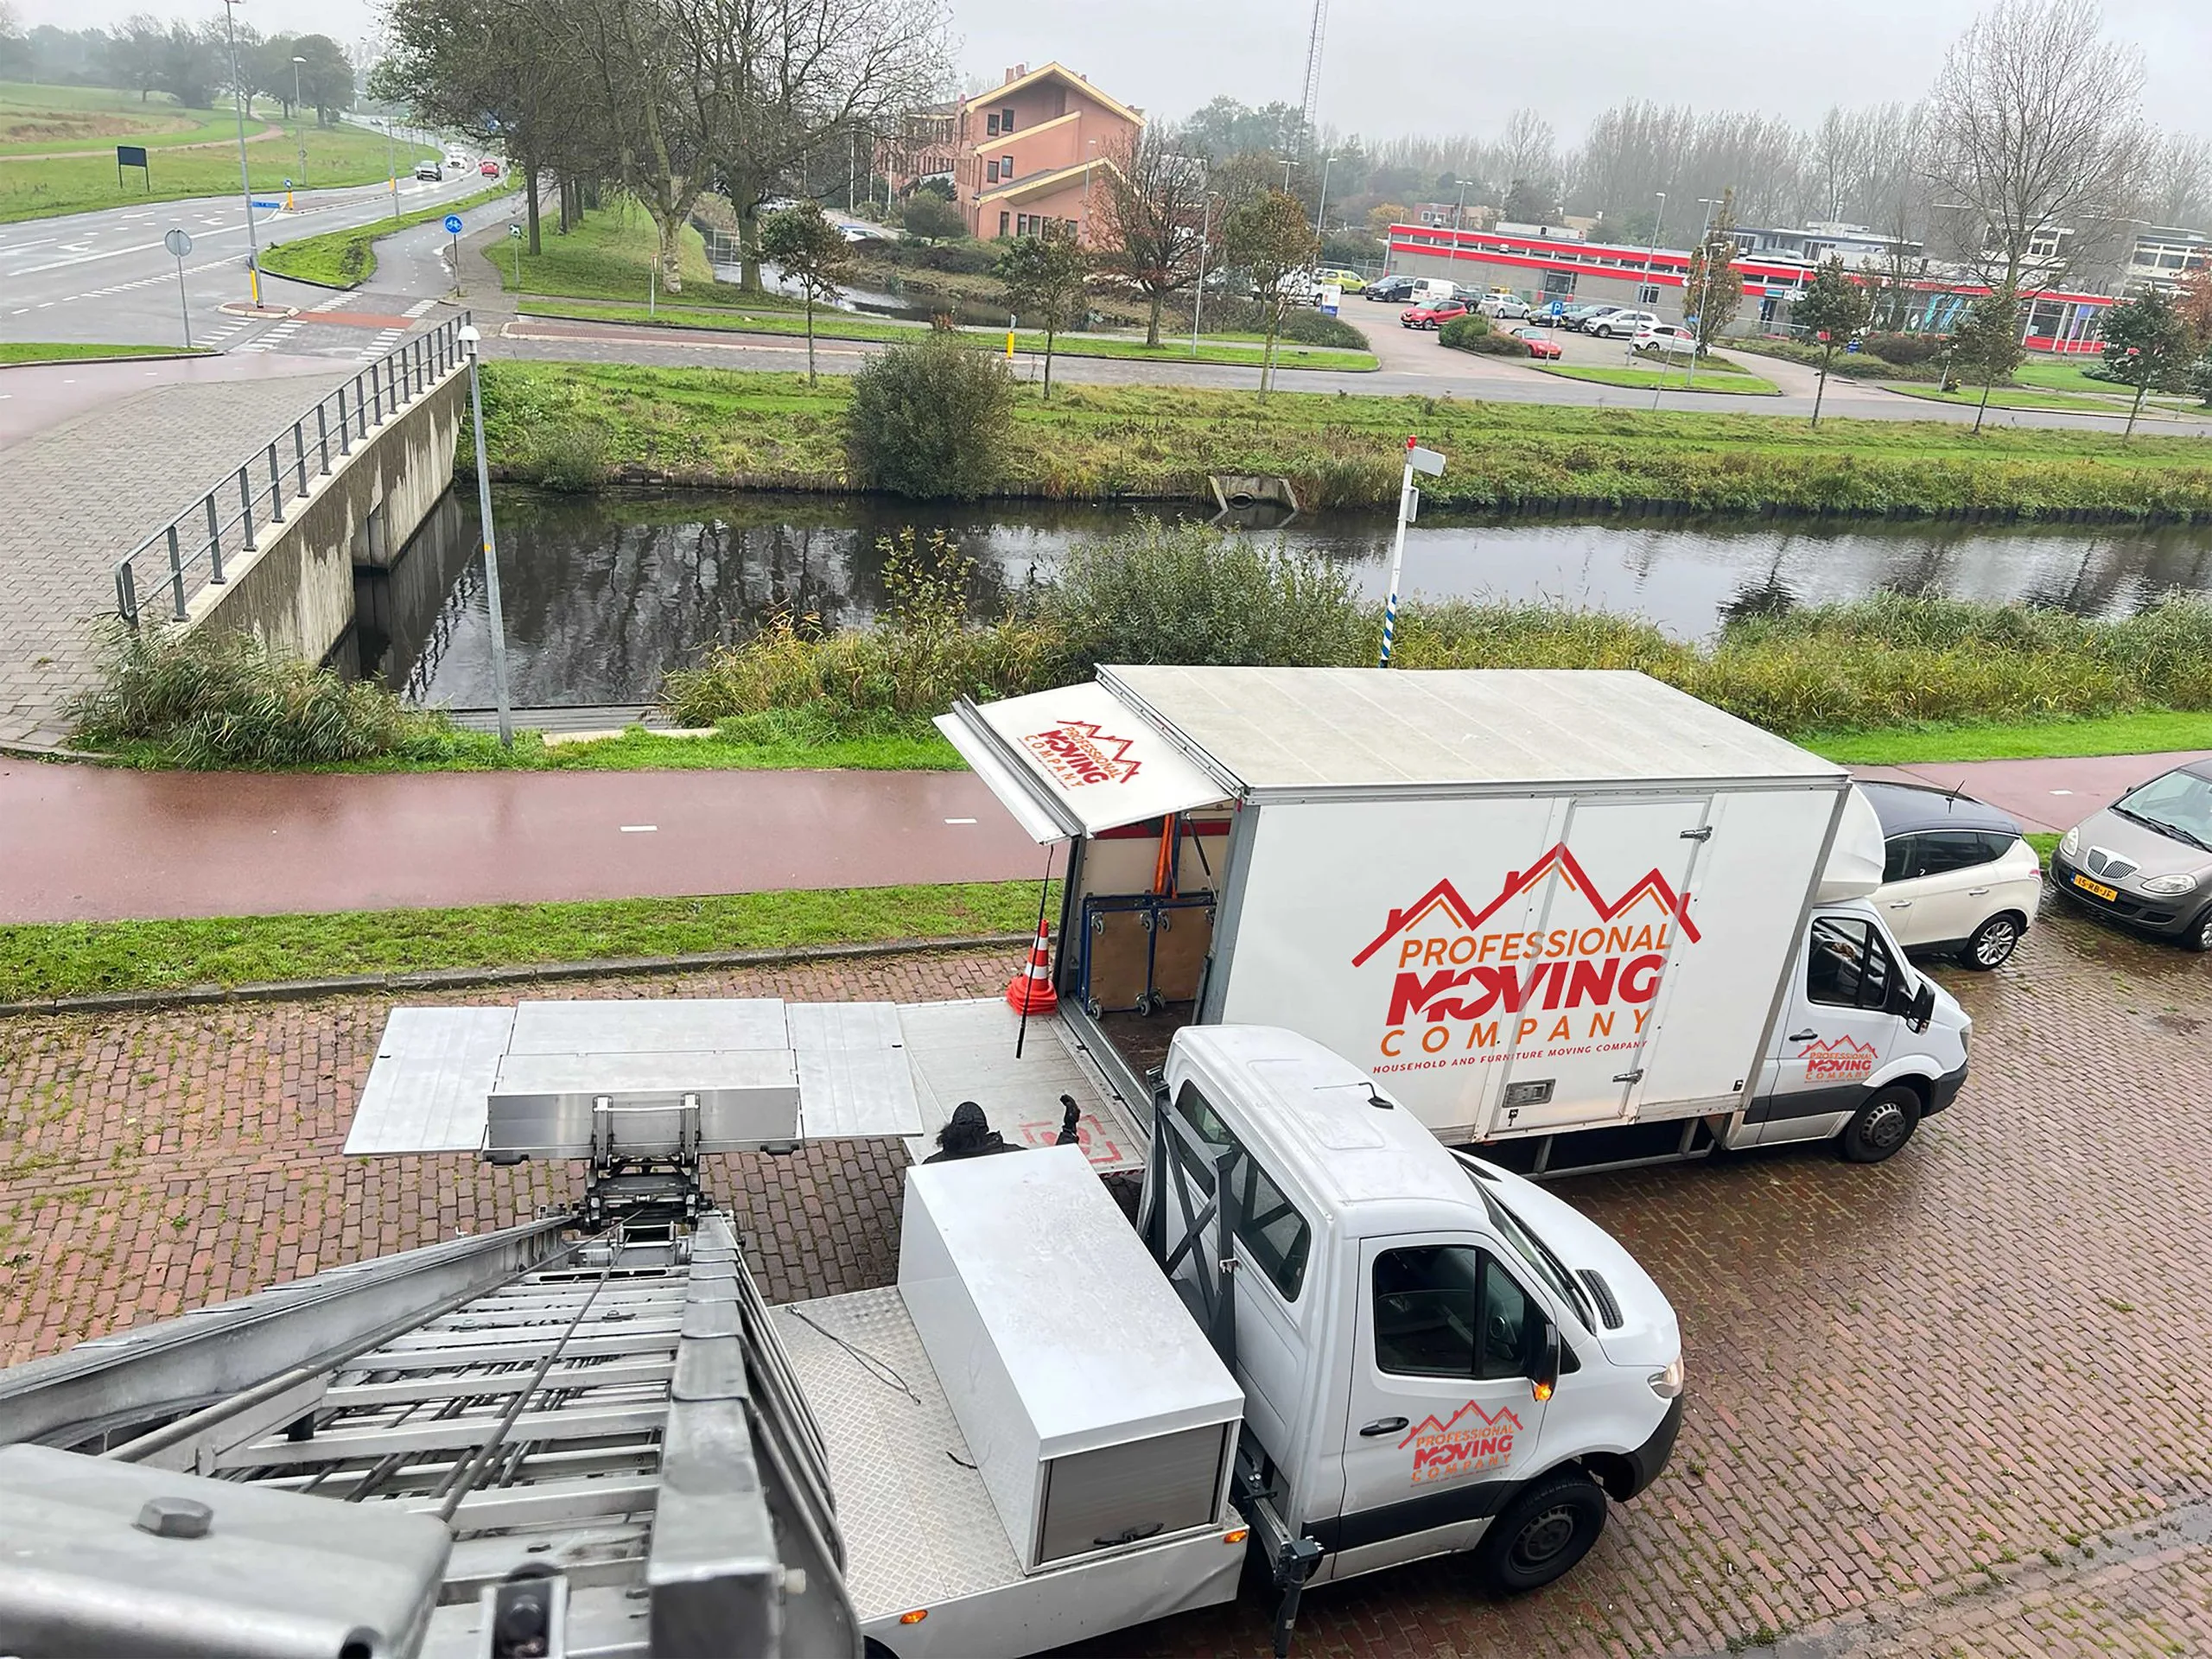 Moving Company Rijswijk | Our Moving Services in Rijswijk: Tailored Solutions for Your Relocation Needs